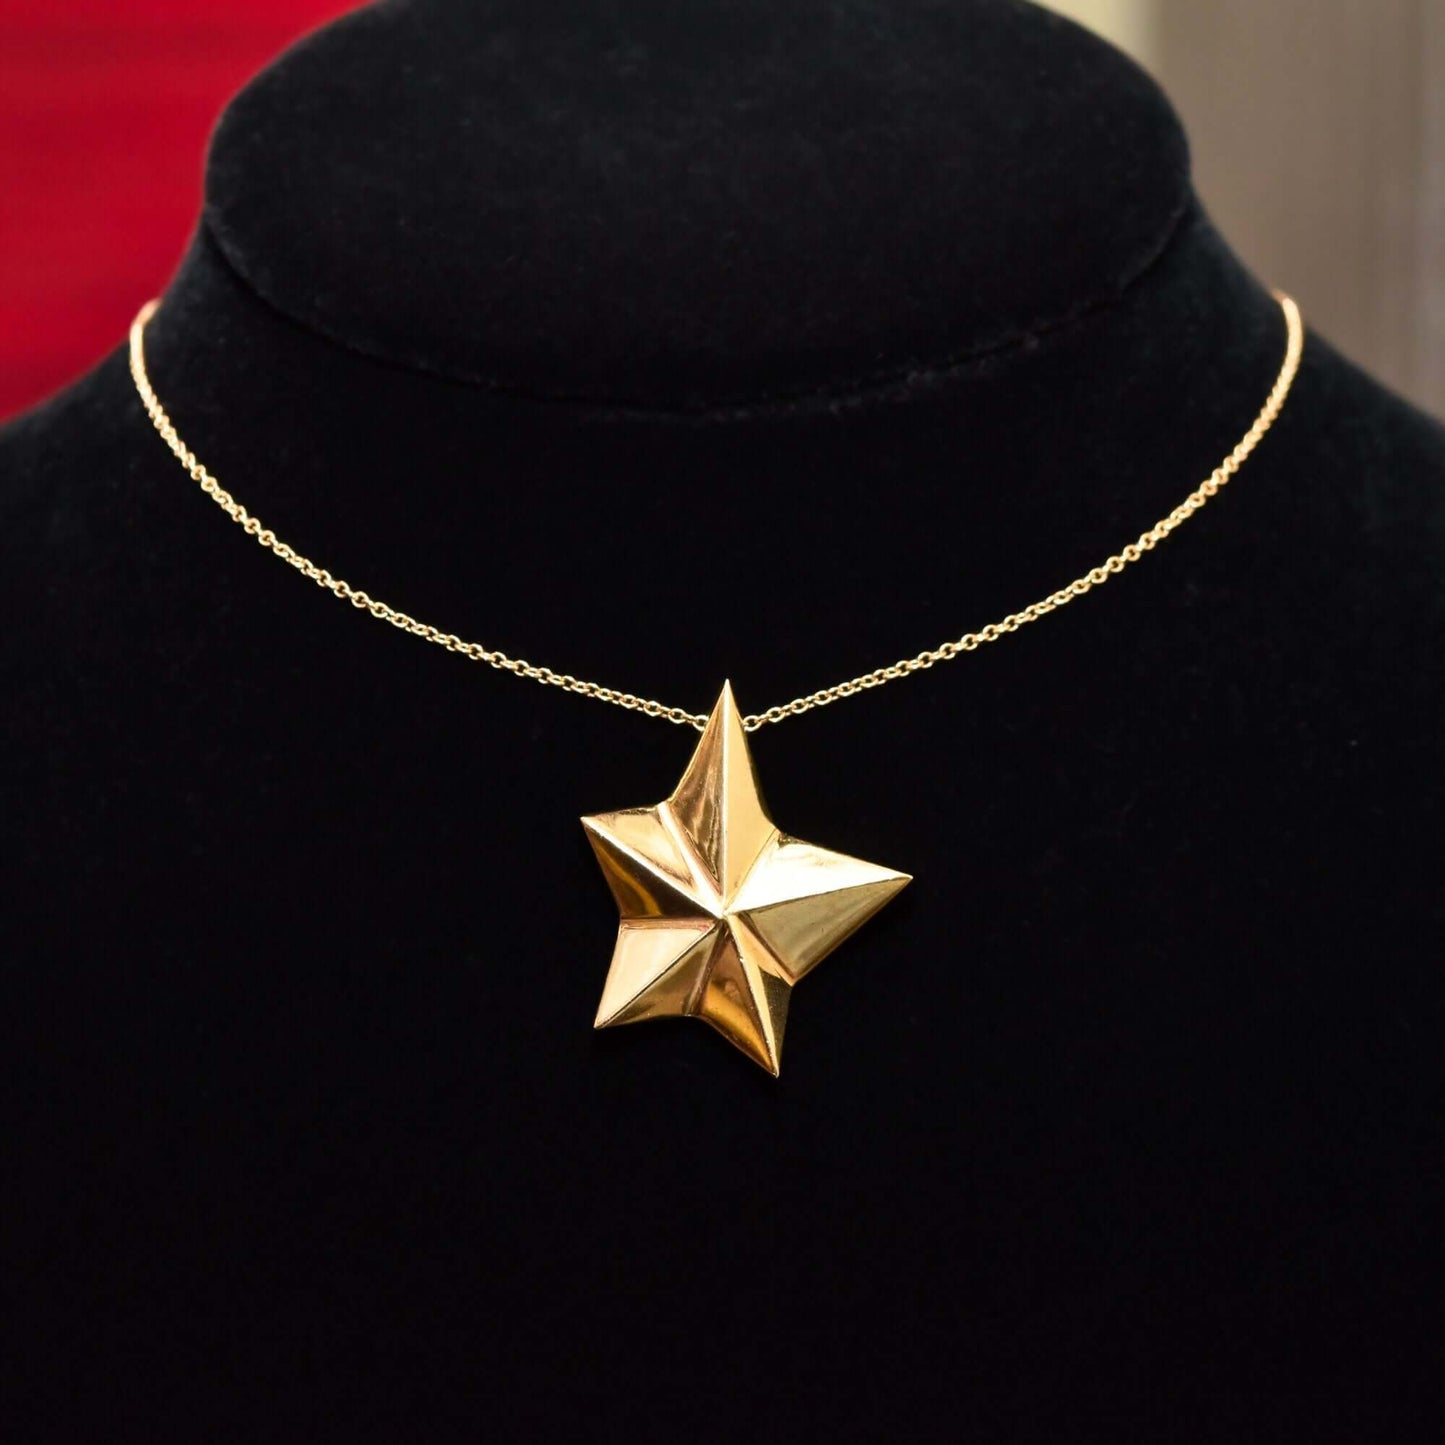 14K Gold Star Pendant Necklace, Asymmetric 5-Pointed Star, 1mm Cable Chain, Christmas Gift, 18.5" L